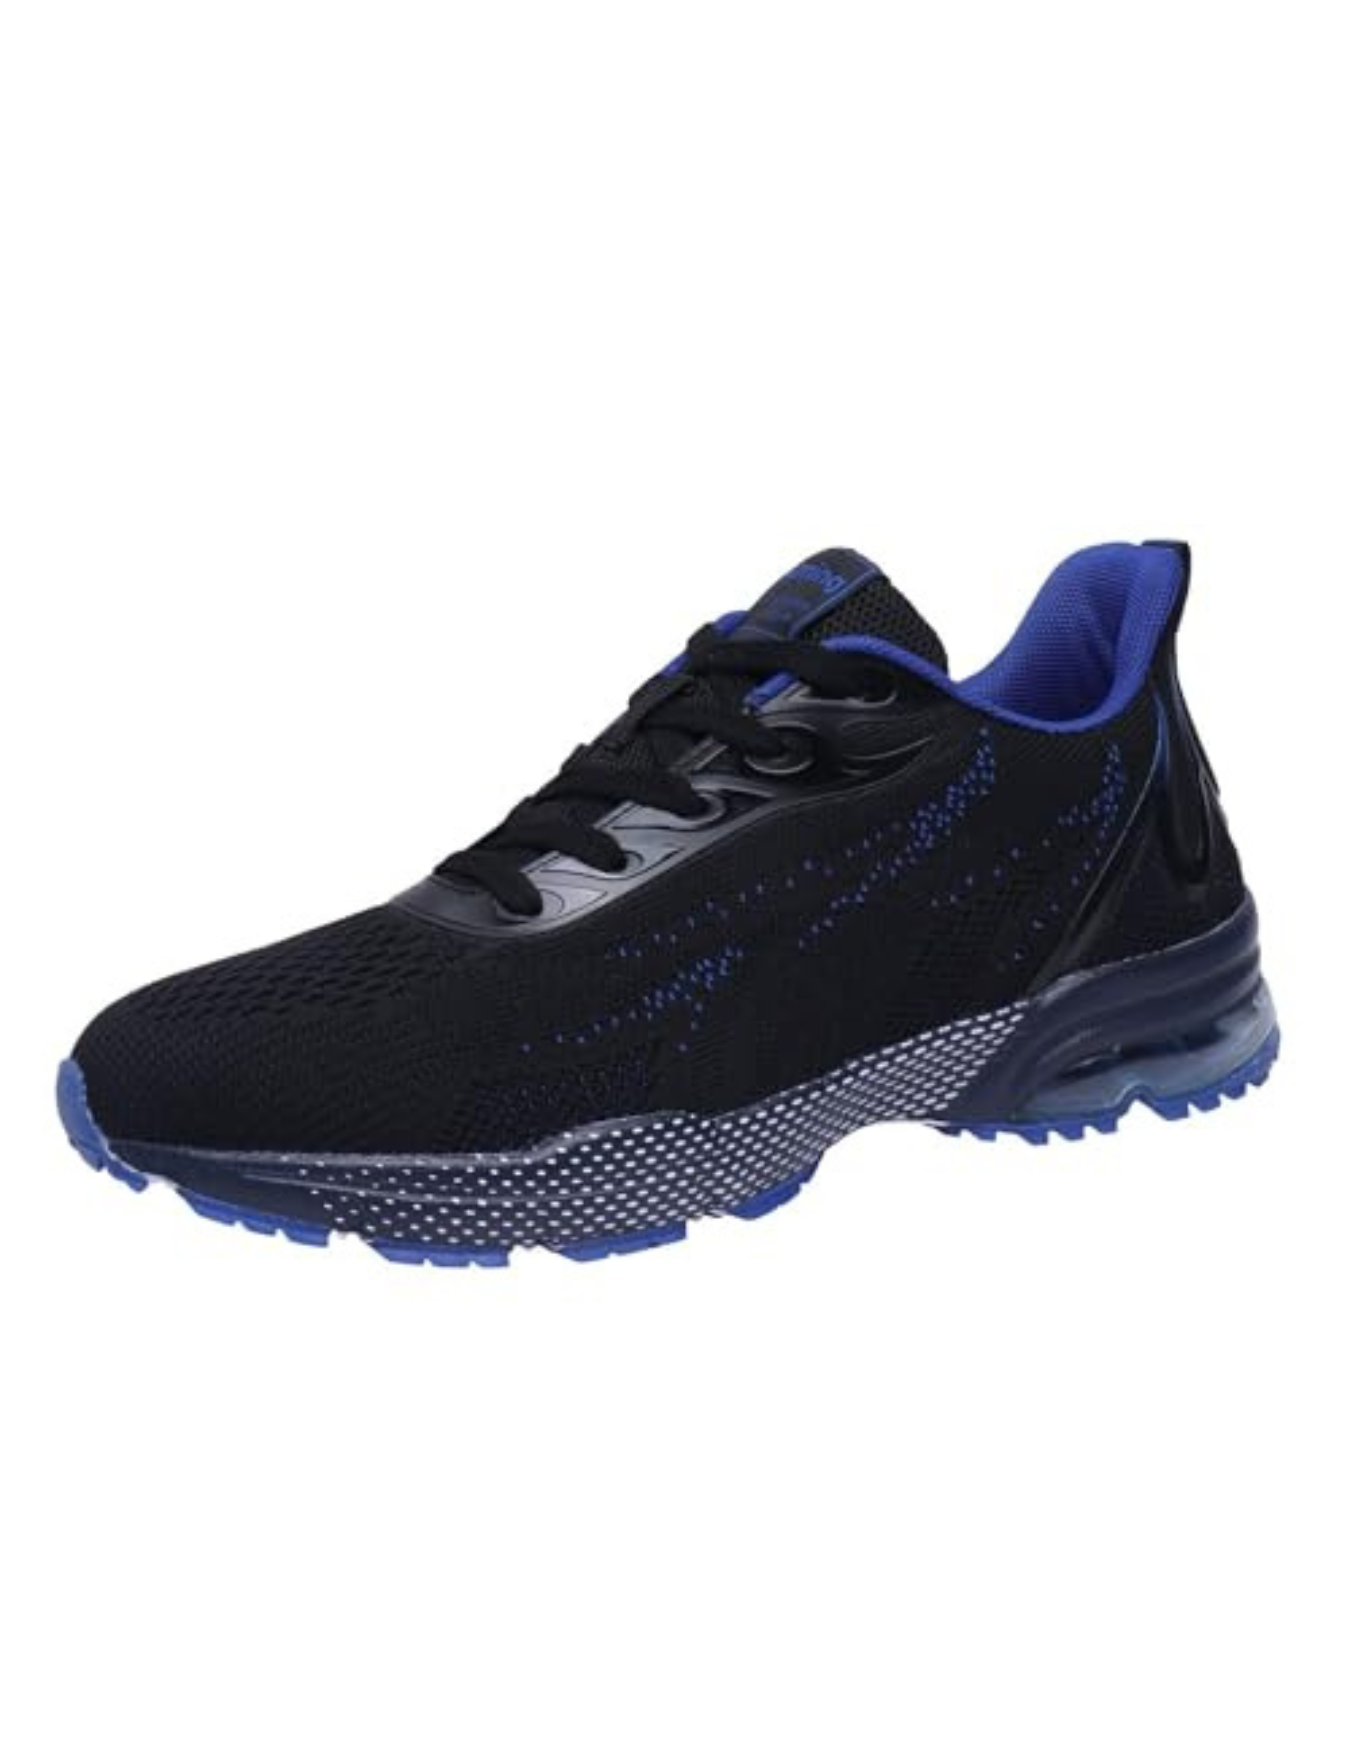 SYKT Running Shoes Mens Womens Fashion Sneakers Tennis Sports Casual Walking Athletic Fitness Indoor and Outdoor Shoes